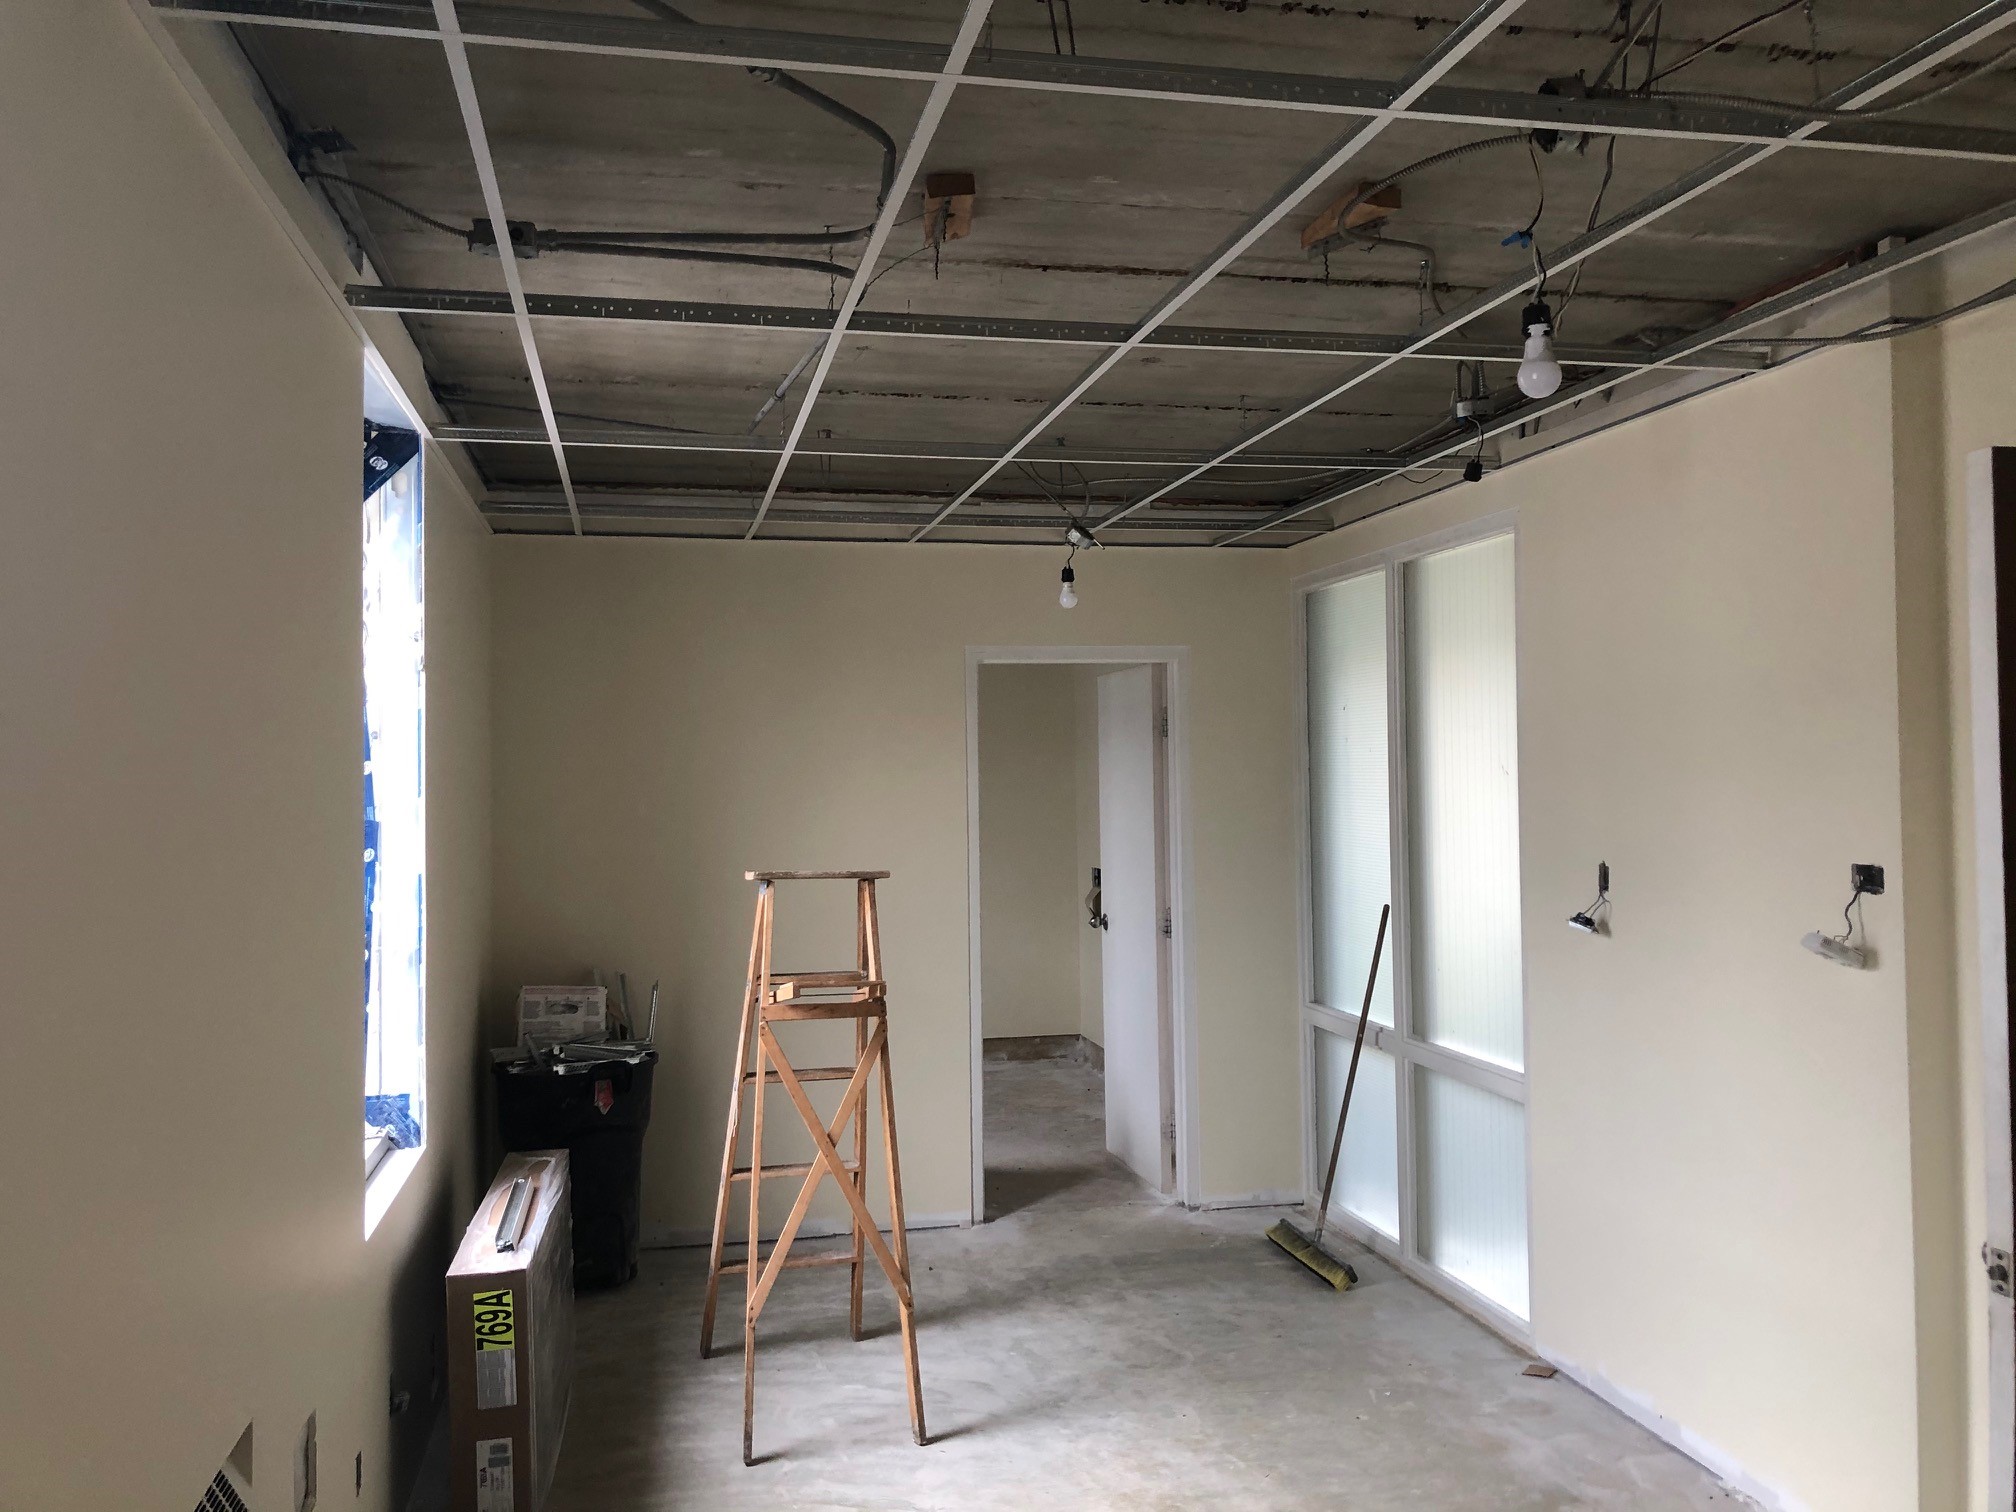 Bugbee Office with Drywall